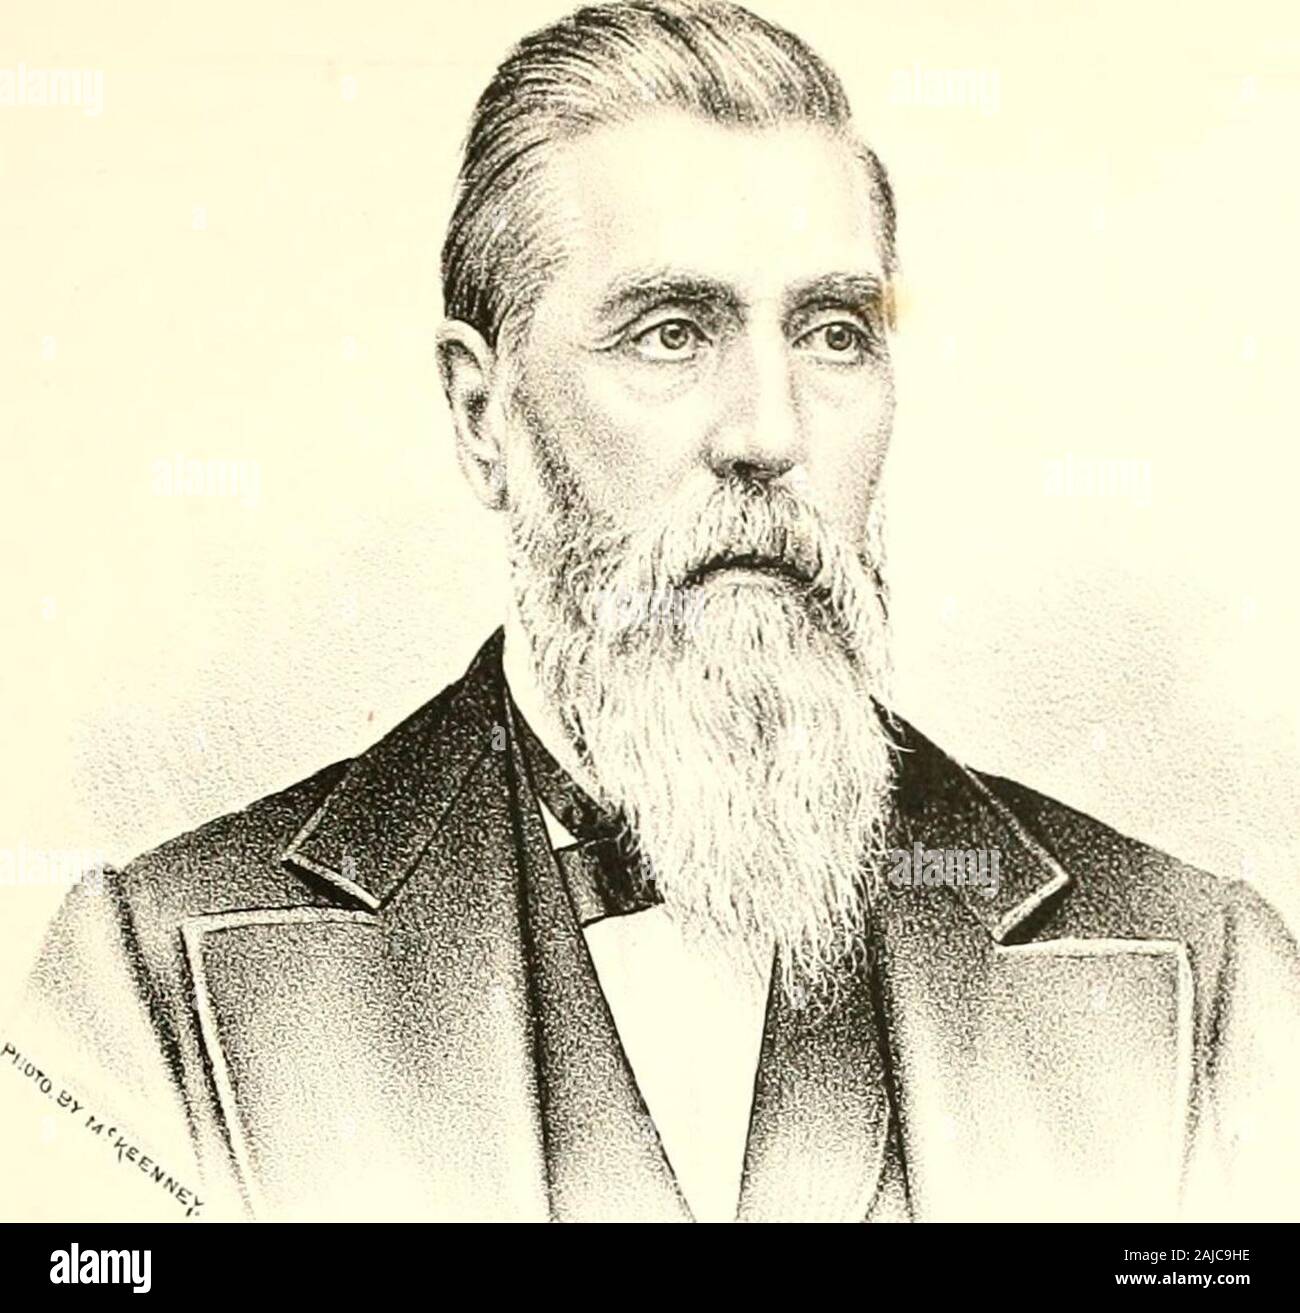 History of York County, Maine With illustrations and biographical sketches of its prominent men and pioneers . d half ofFactory Island to Capt. John Bonython for 800 pine-trees, suitable to make merchantable boards. He was anextensive landholder, buying large tracts.of the Indiansagamores, which his descendants inherited. He was aman of much consideration in those times, and great defer-ence was shown him by the people. It is traditional thata man was fined for saying Maj. Phillips horse is as leanas an Indian dog. Before 1670, he sold several largetracts, partly lying within his patent. The f Stock Photo